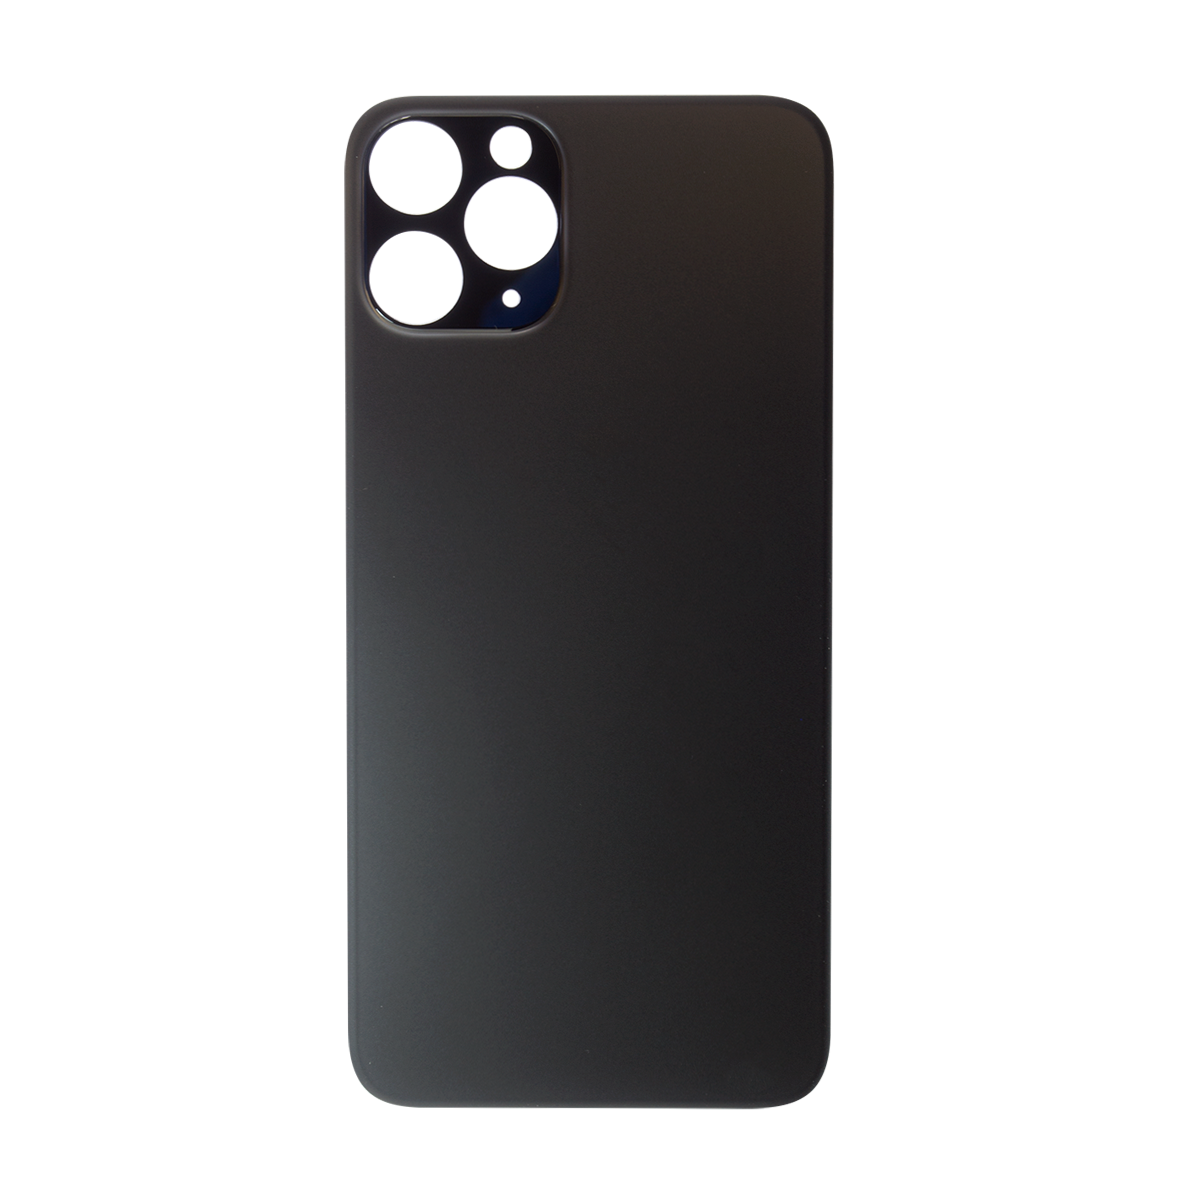 iPhone 11 Pro Rear Glass Cover with Large Camera hole